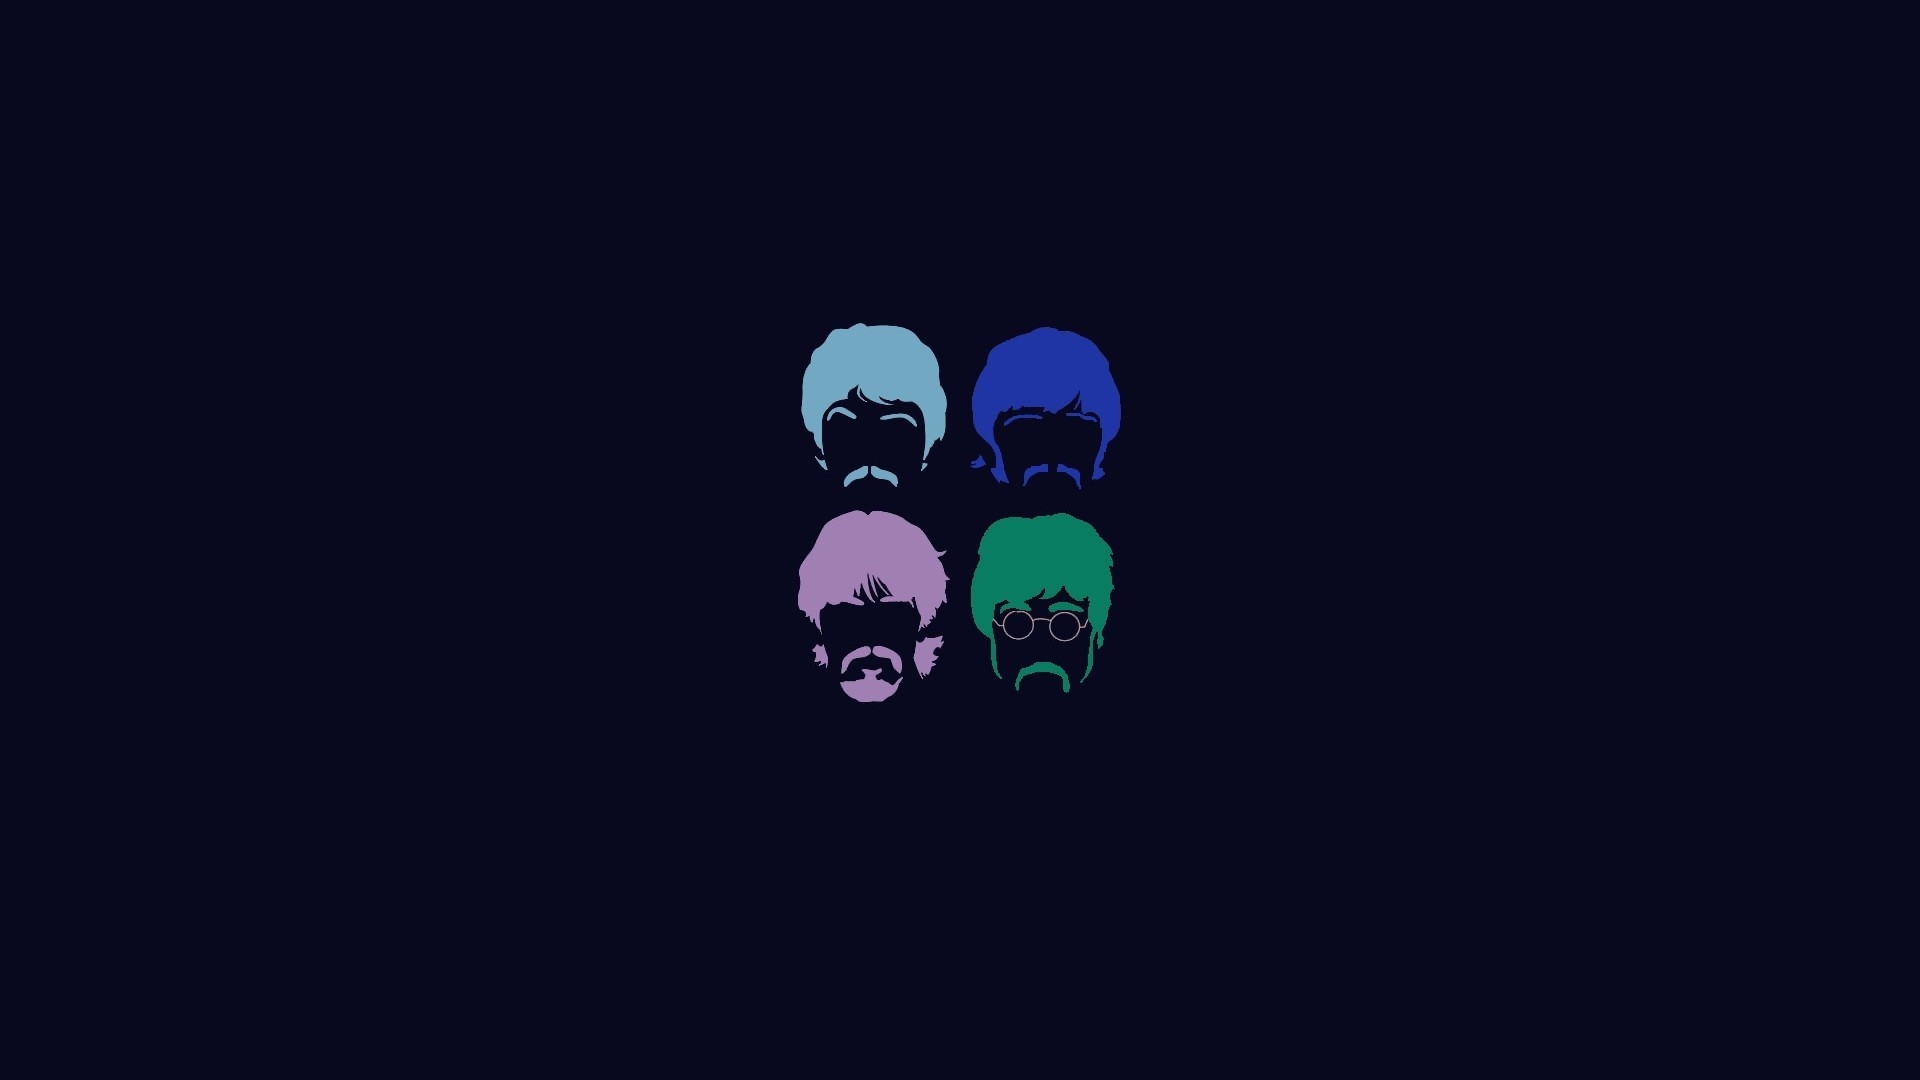 The Beatles Art Faces for 1920 x 1080 HDTV 1080p resolution